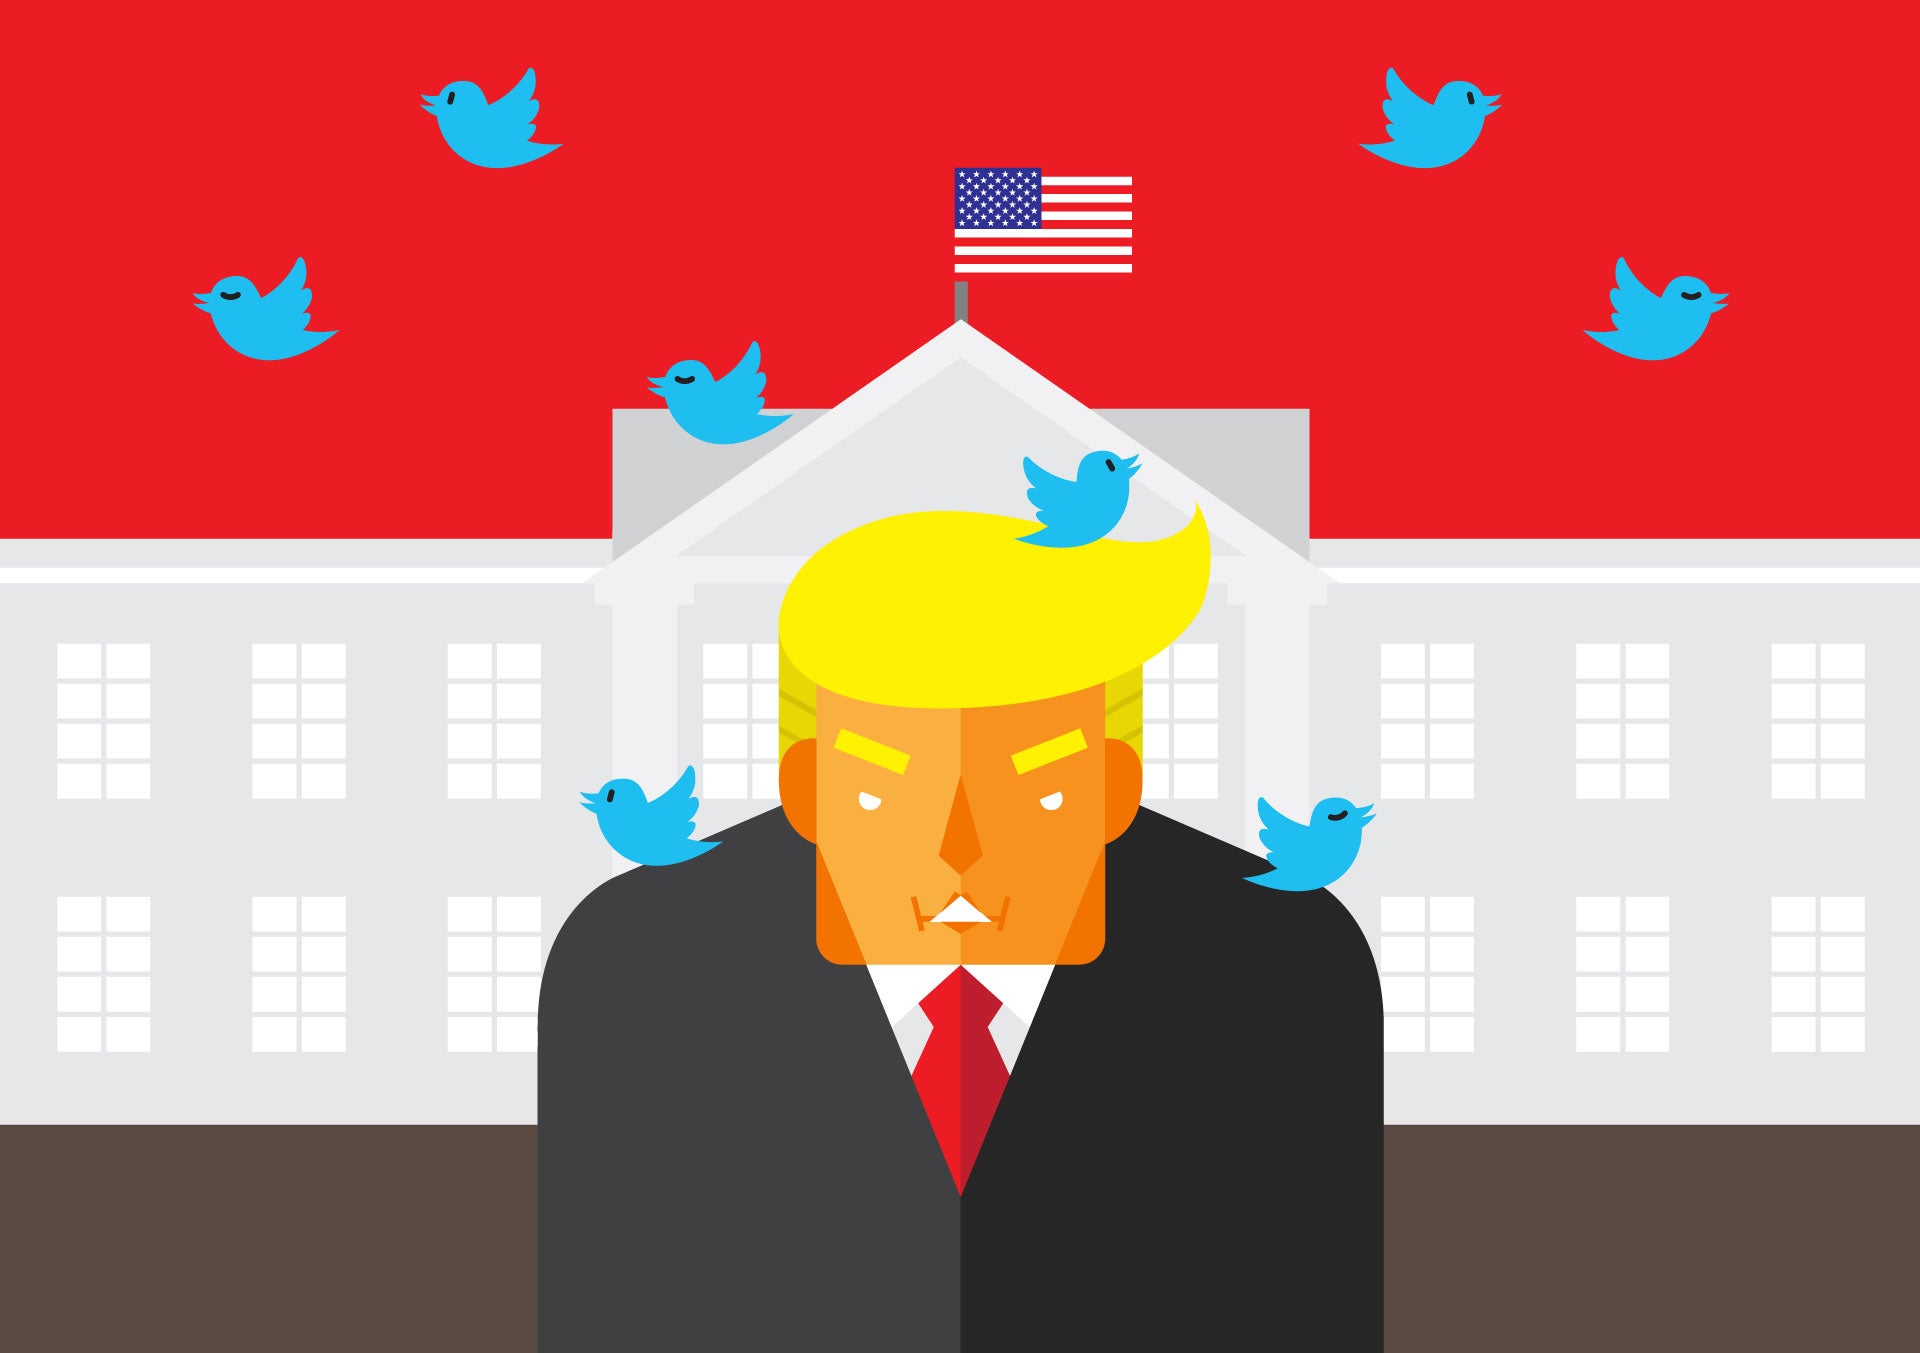 The Twitter President is trying to destroy his maker, but while Trump needs Twitter, Twitter doesn’t need him